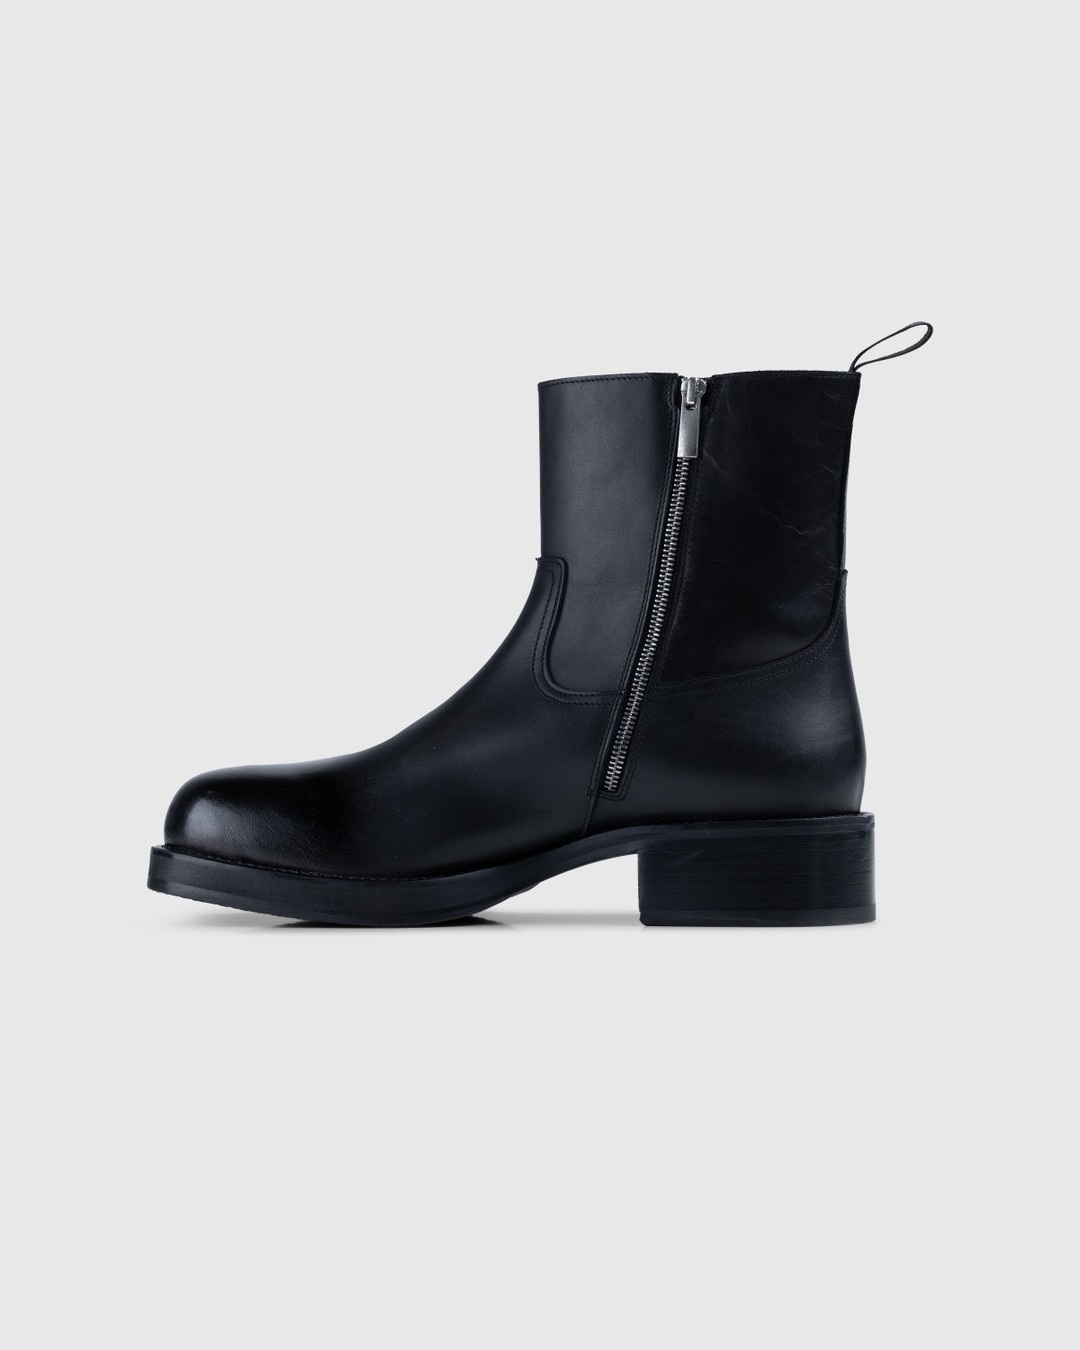 Acne Studios – Sprayed Leather Ankle Boots Black - Zip-up & Buckled Boots - Black - Image 2